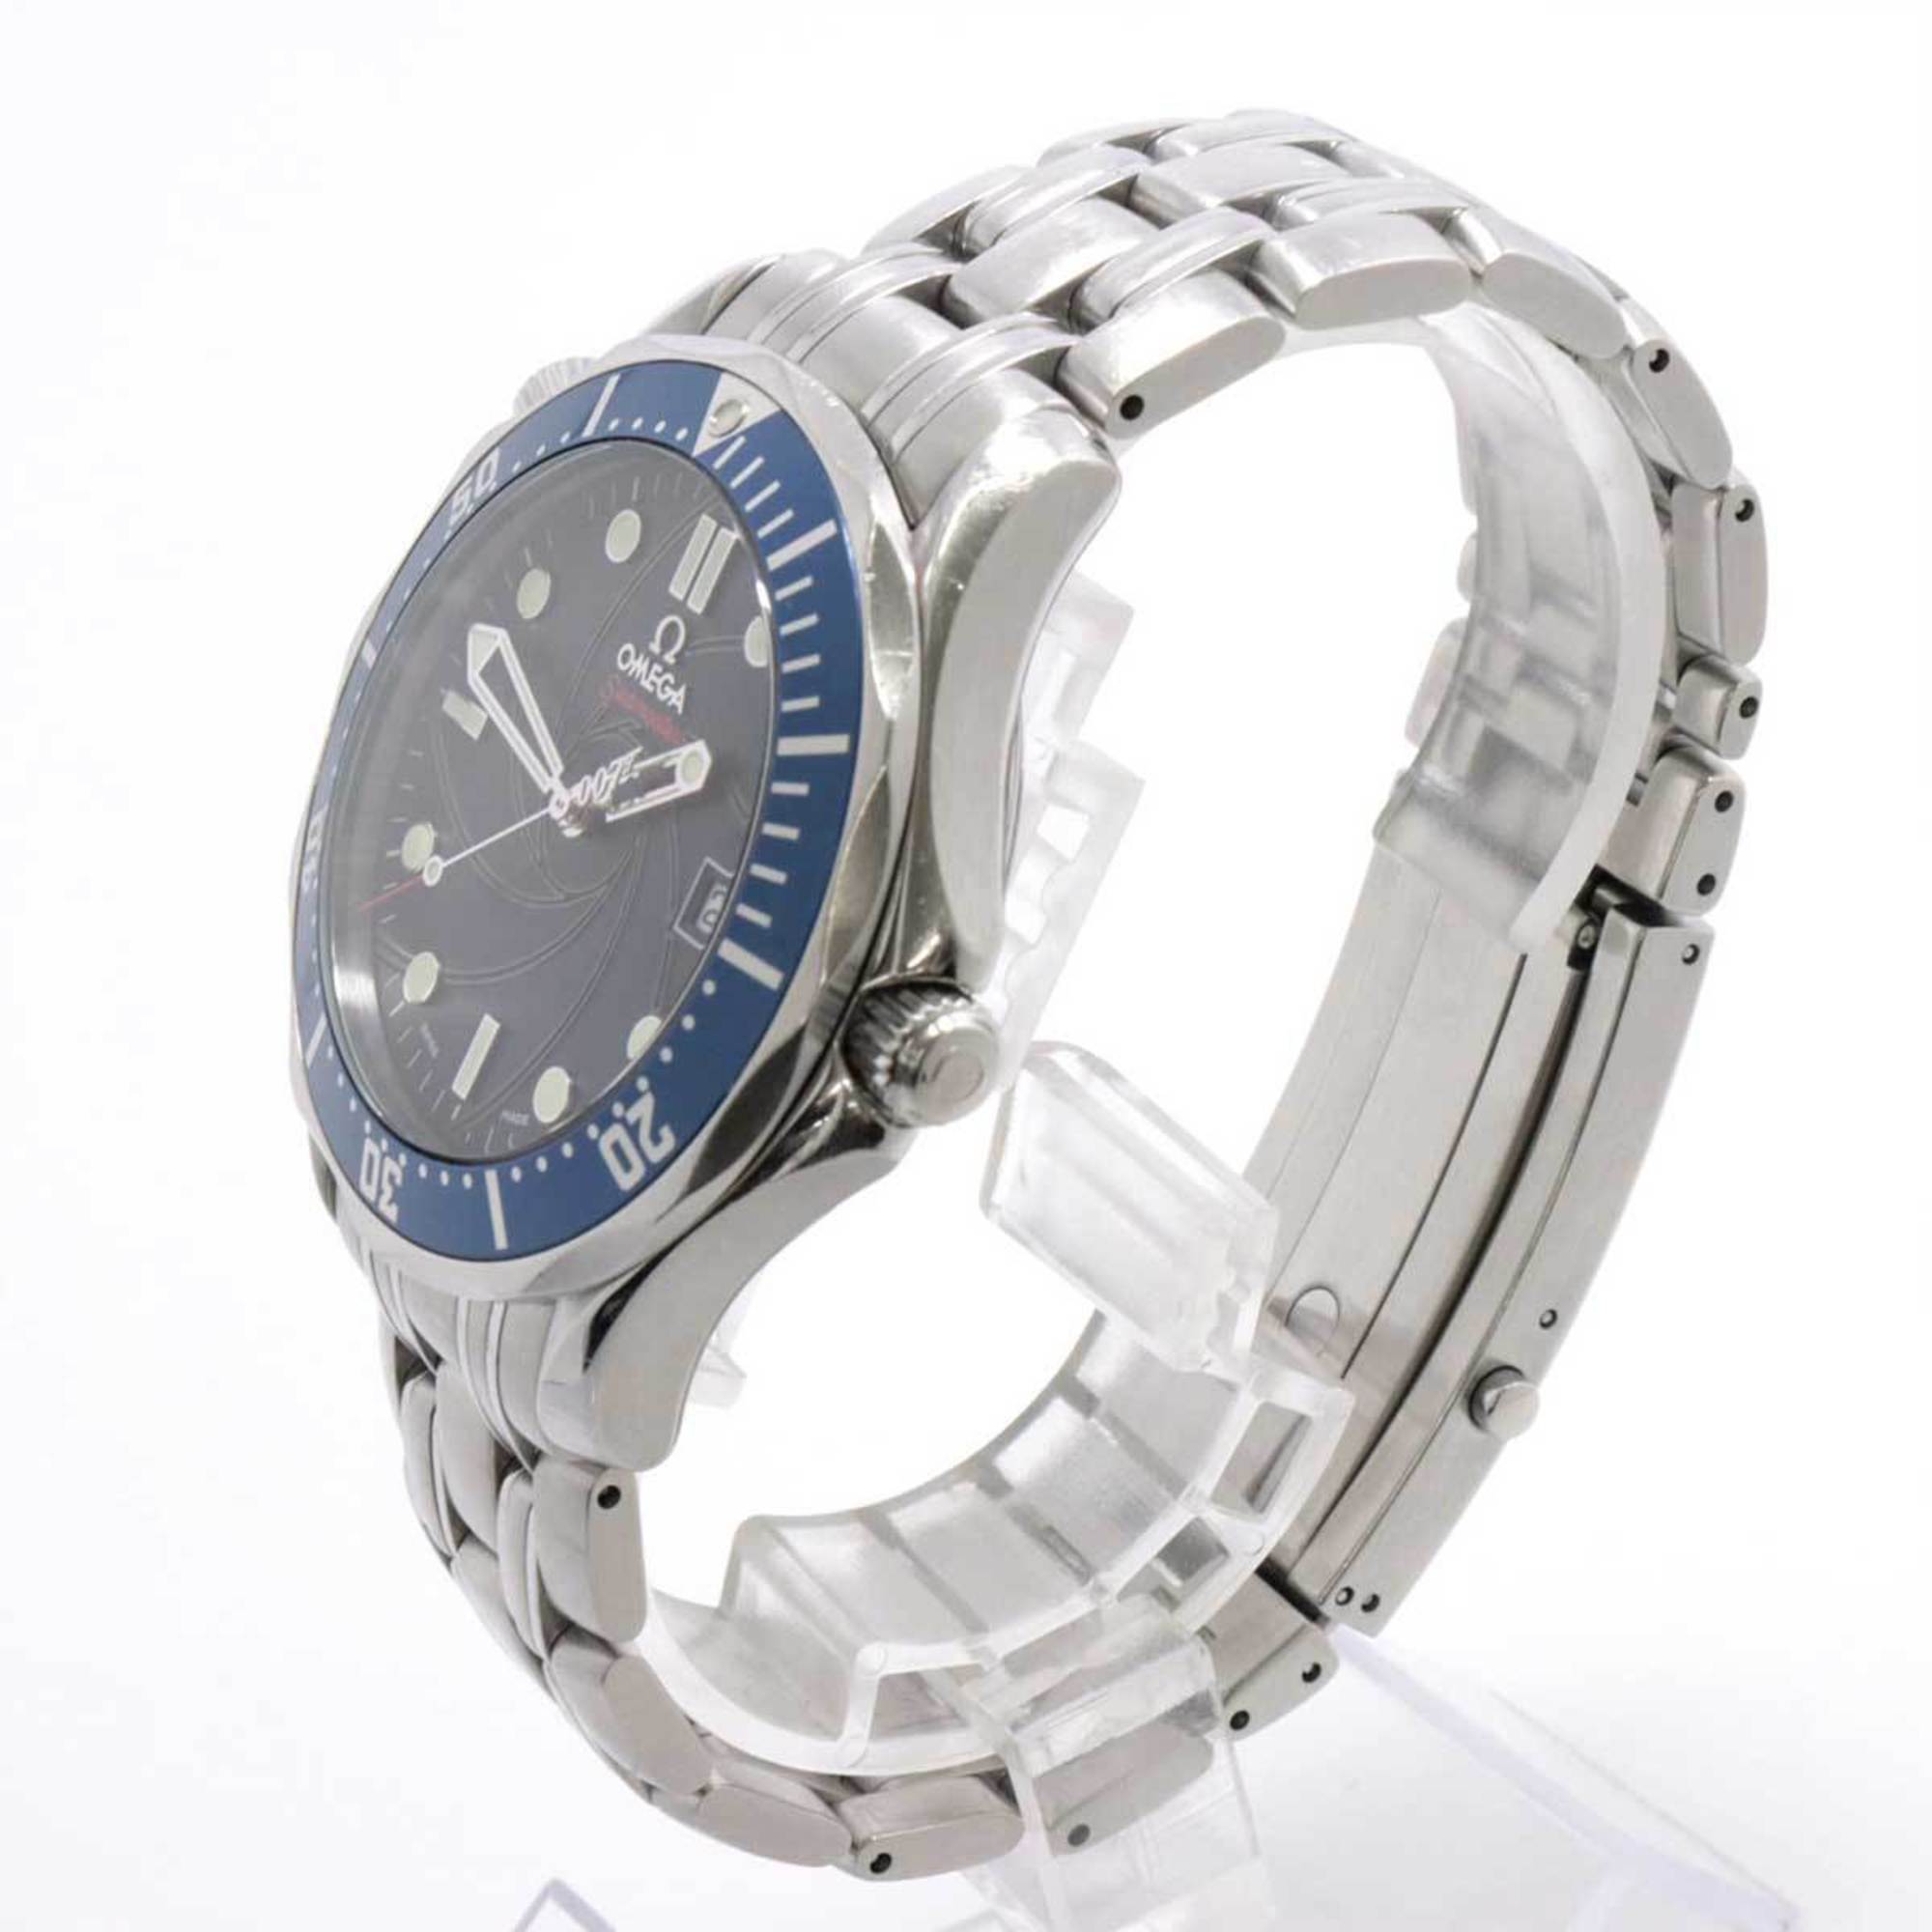 Omega OMEGA Seamaster Professional 2226 80 James Bond 007 World Limited 10007 Men's Watch Date Blue Dial Automatic